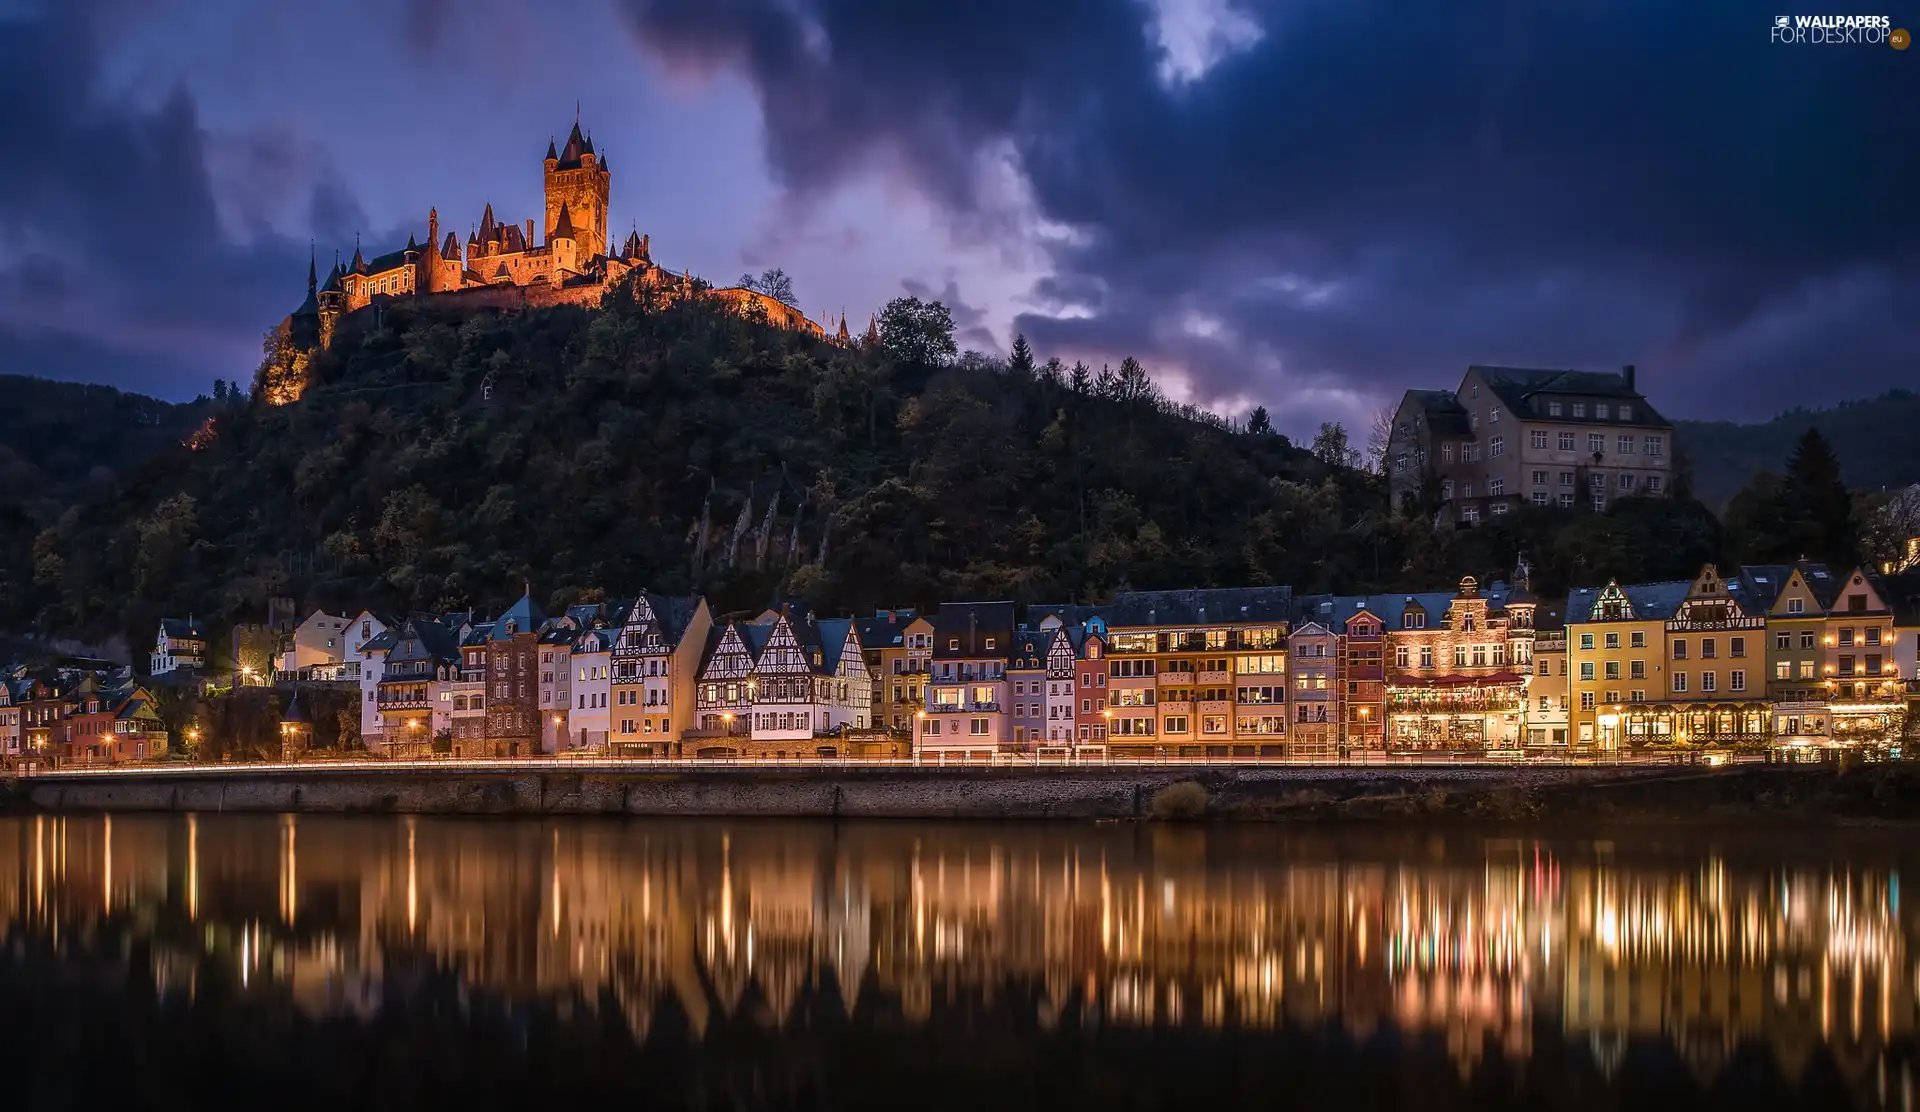 vessels, Houses, City of Cochem, Moselle River, Reichsburg Castle, light, Germany